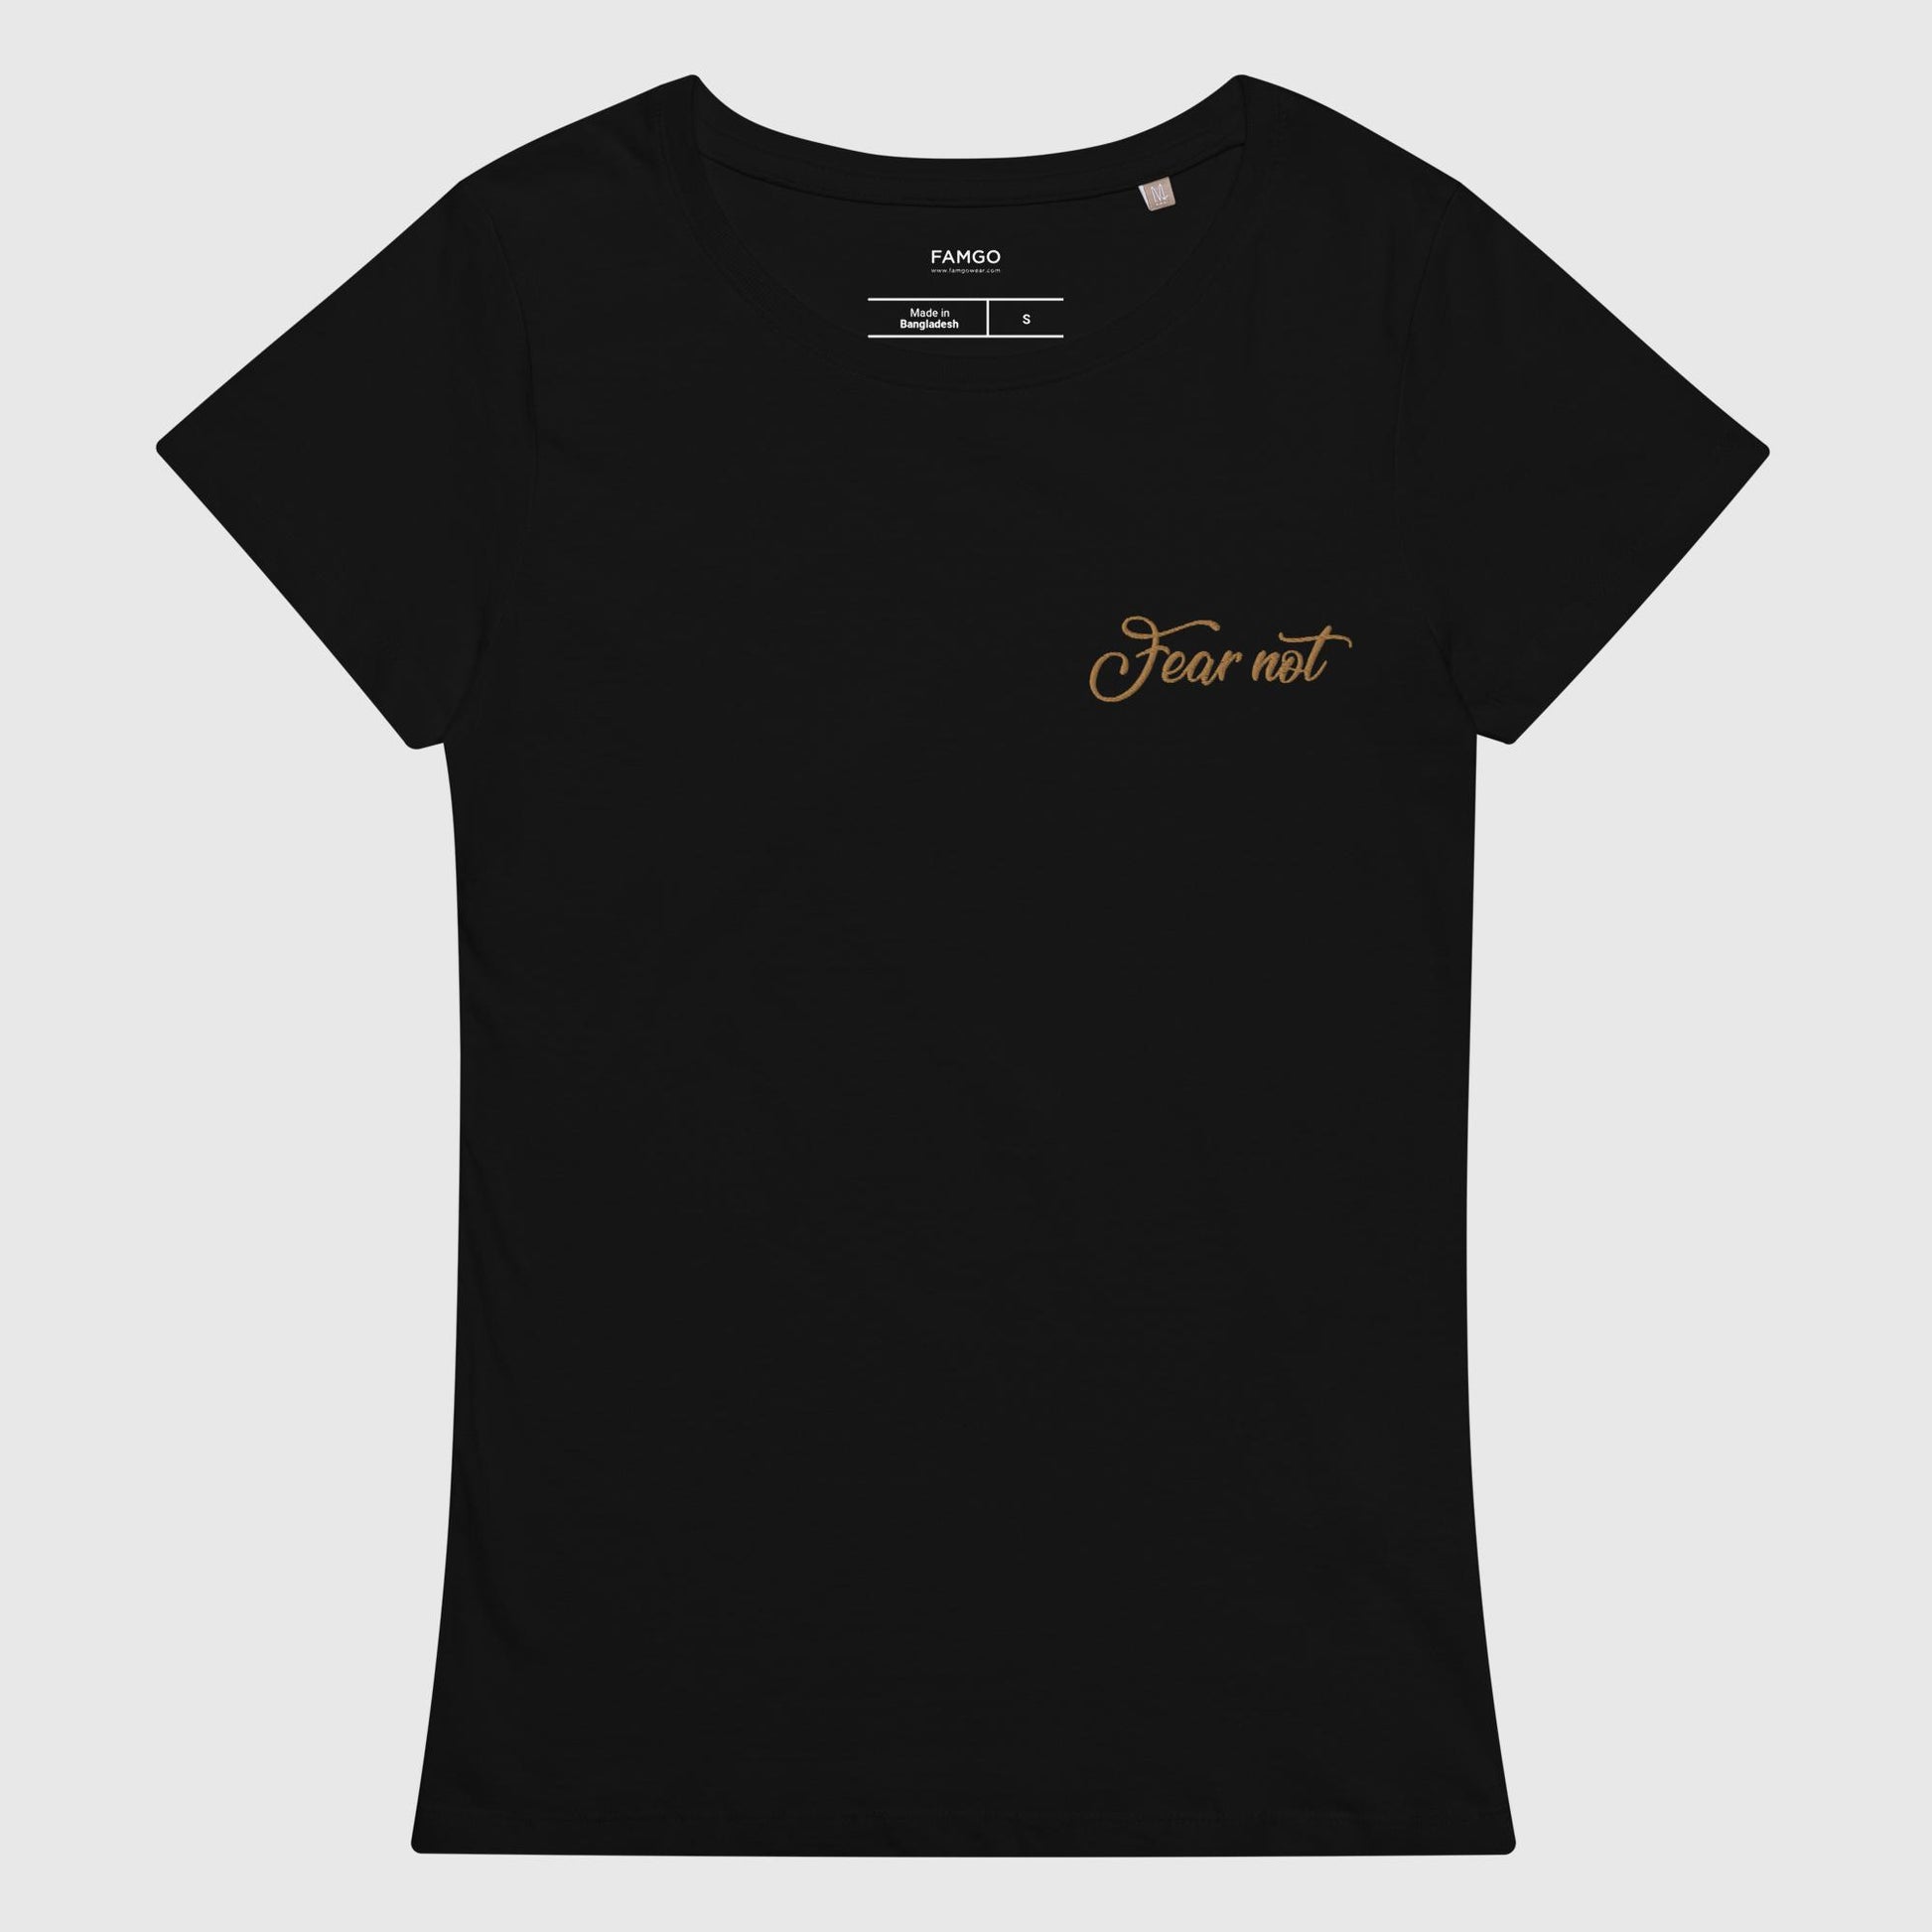 Women's black organic cotton t-shirt that features the inspirational quote, "Fear Not."